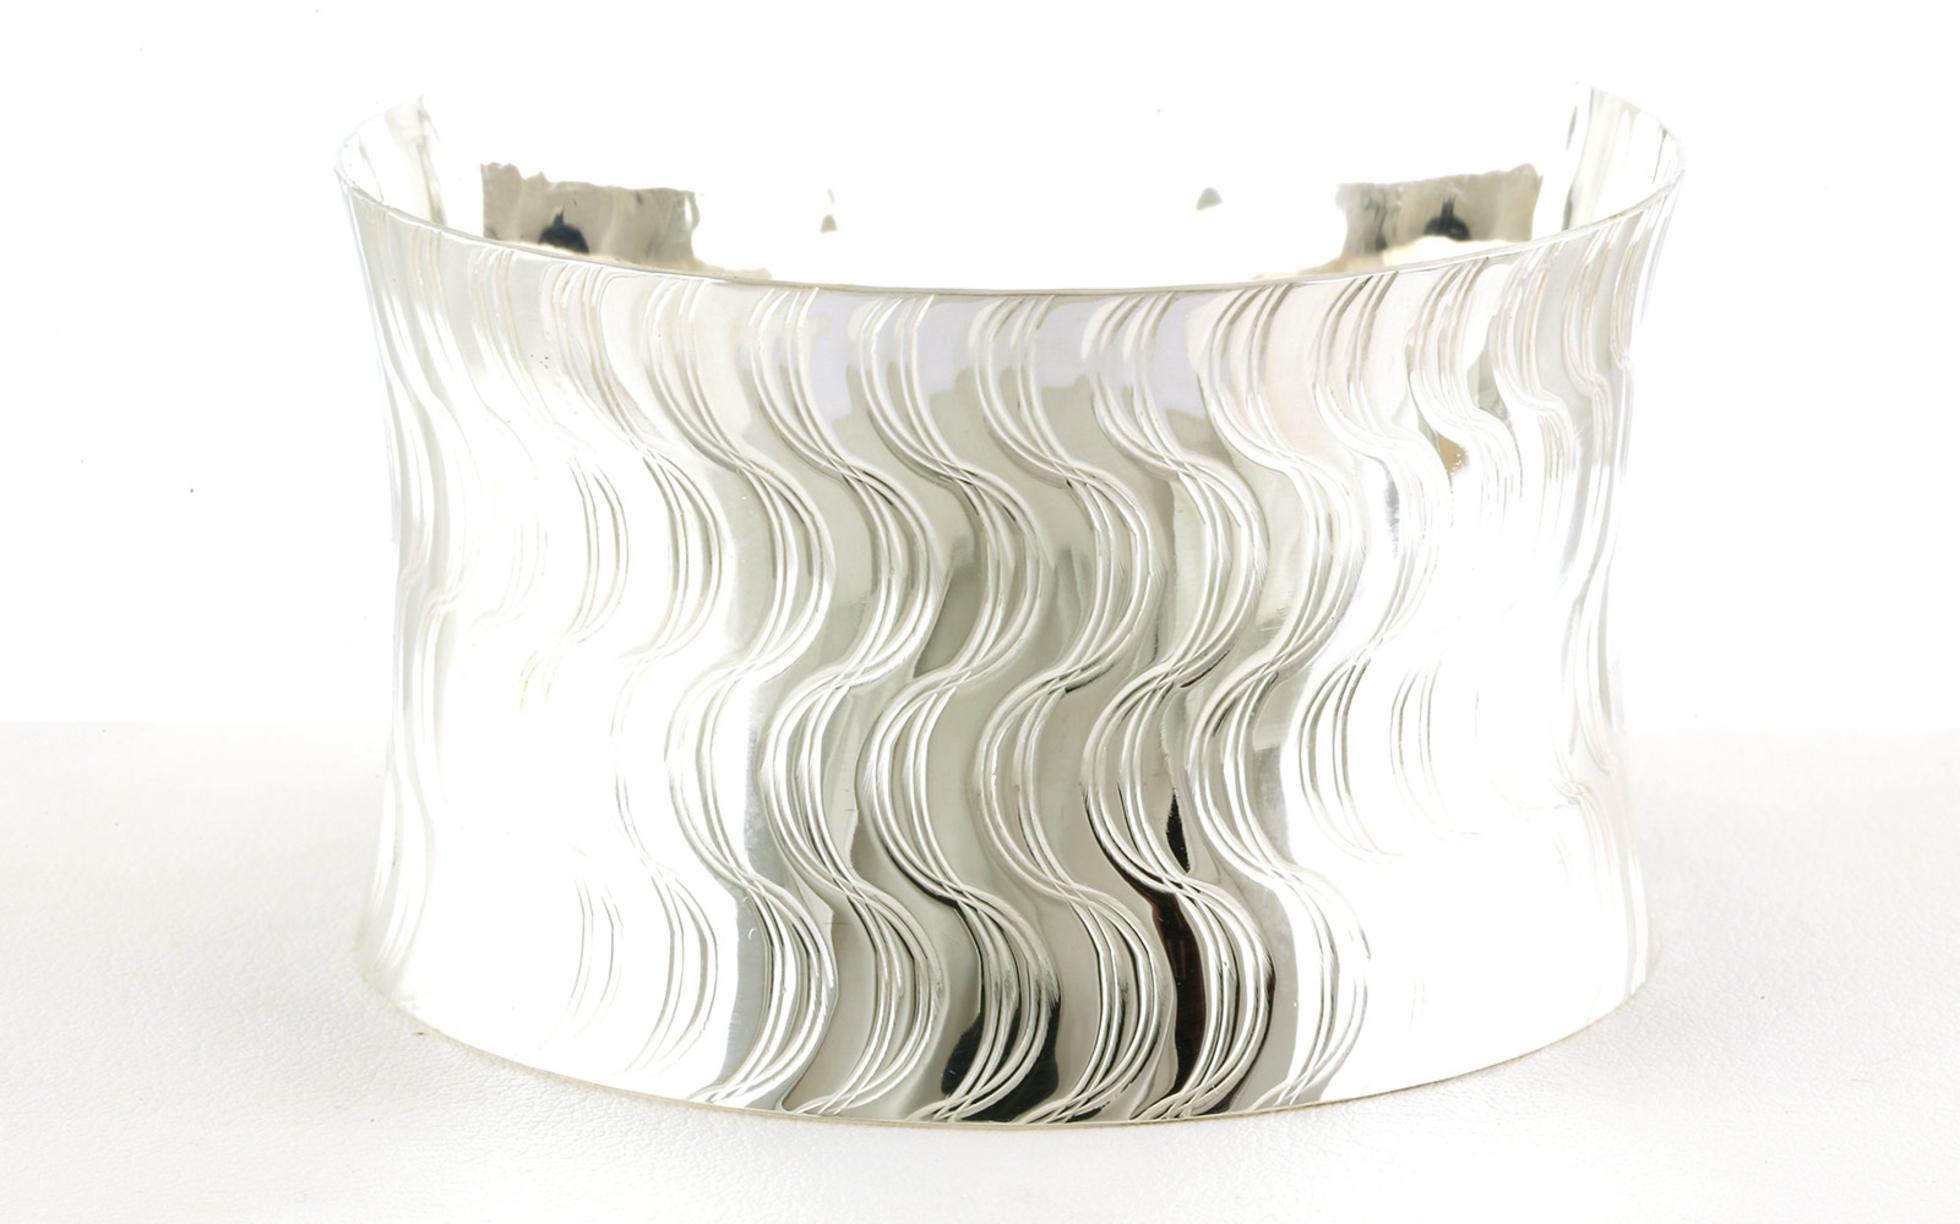 Estate Piece: Wide Cuff-style Bracelet with Wavy Texture in Sterling Silver